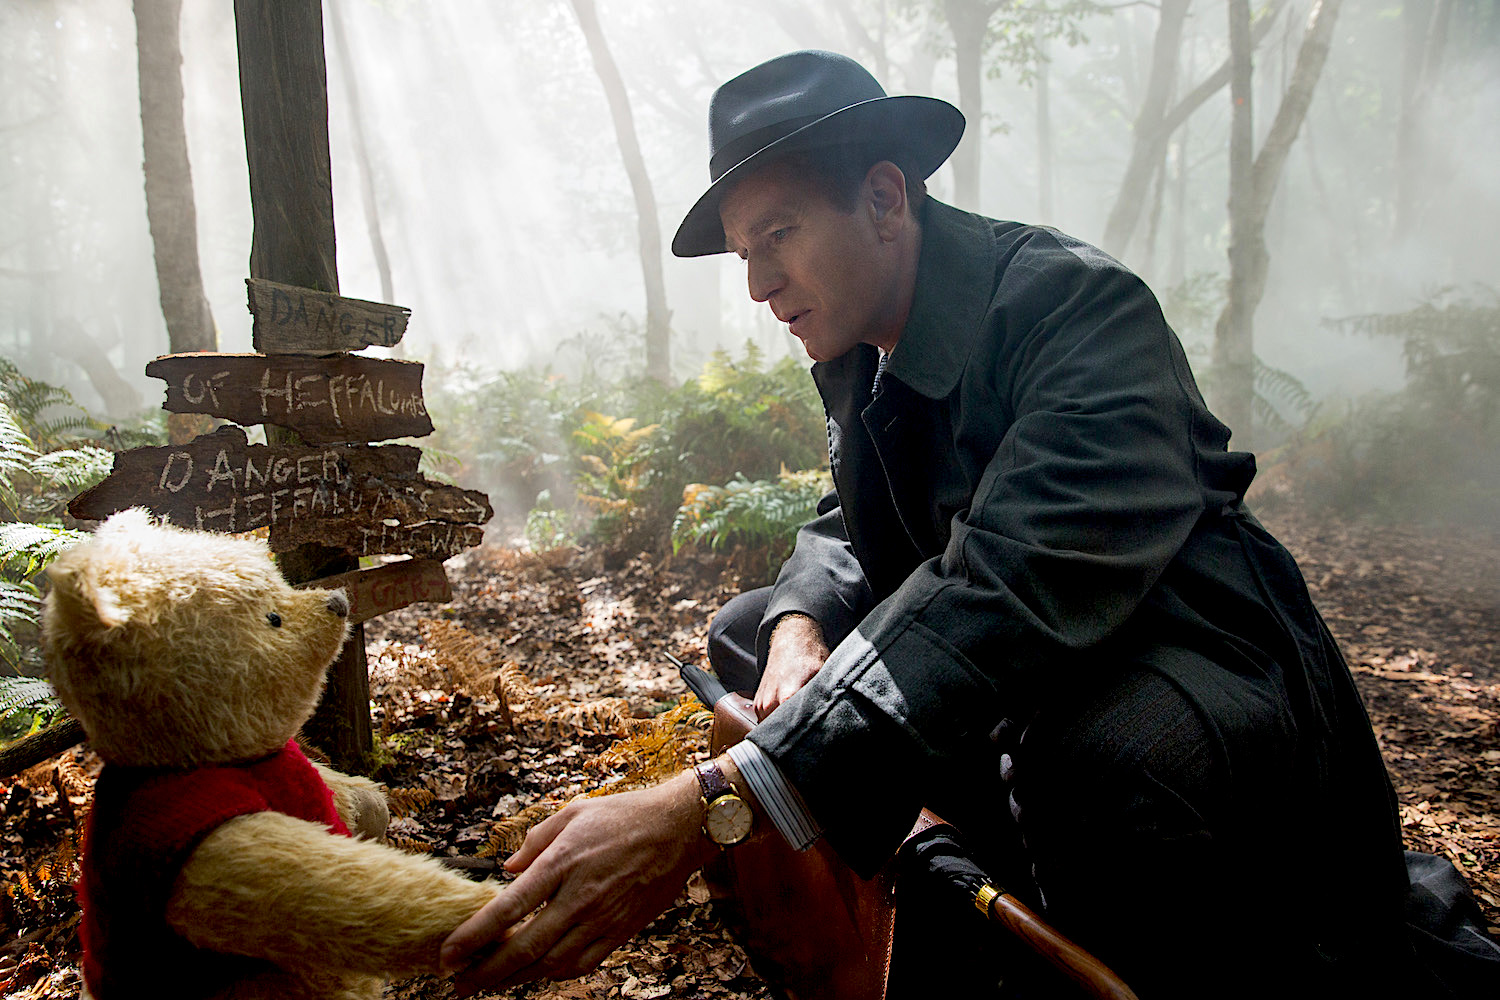 This Week In Movies: ‘Christopher Robin,’ ‘The Spy Who Dumped Me,’ ‘Never Going Back’